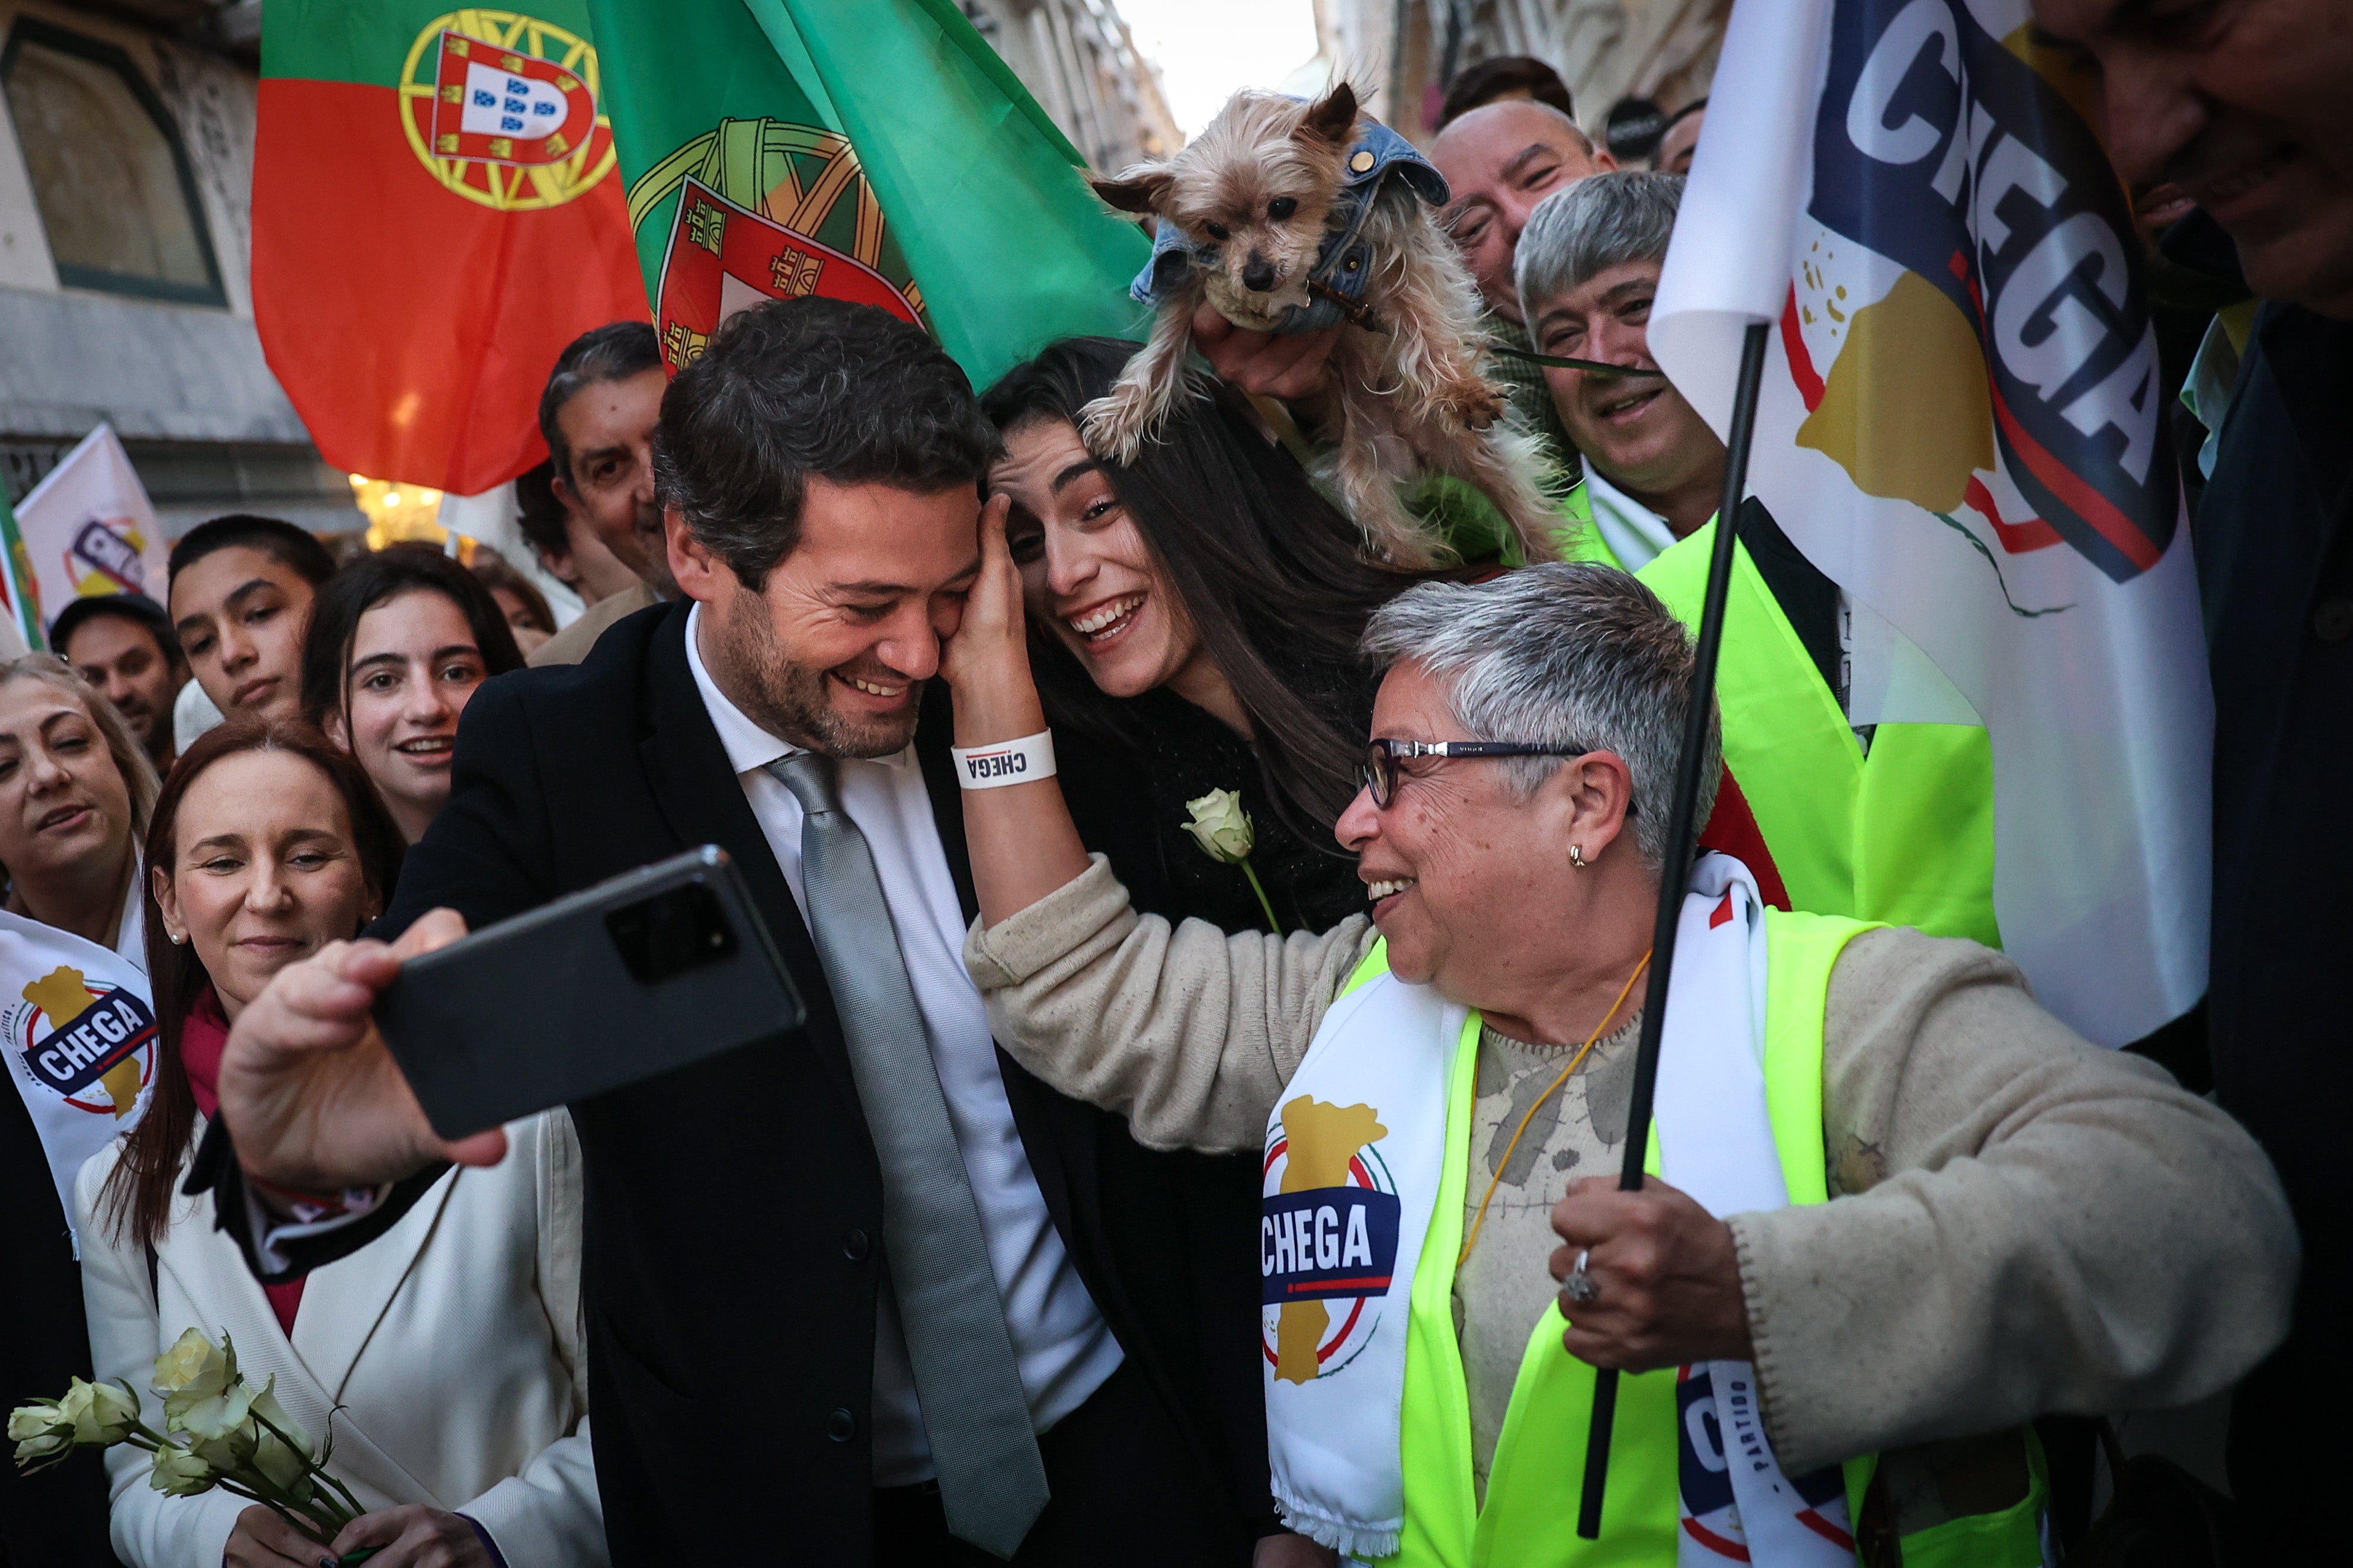 Far-right Party Chega leader Andre Ventura, centre, takes a selfie with the Portuguese actress, Maria Vieira, right, during the election campaign